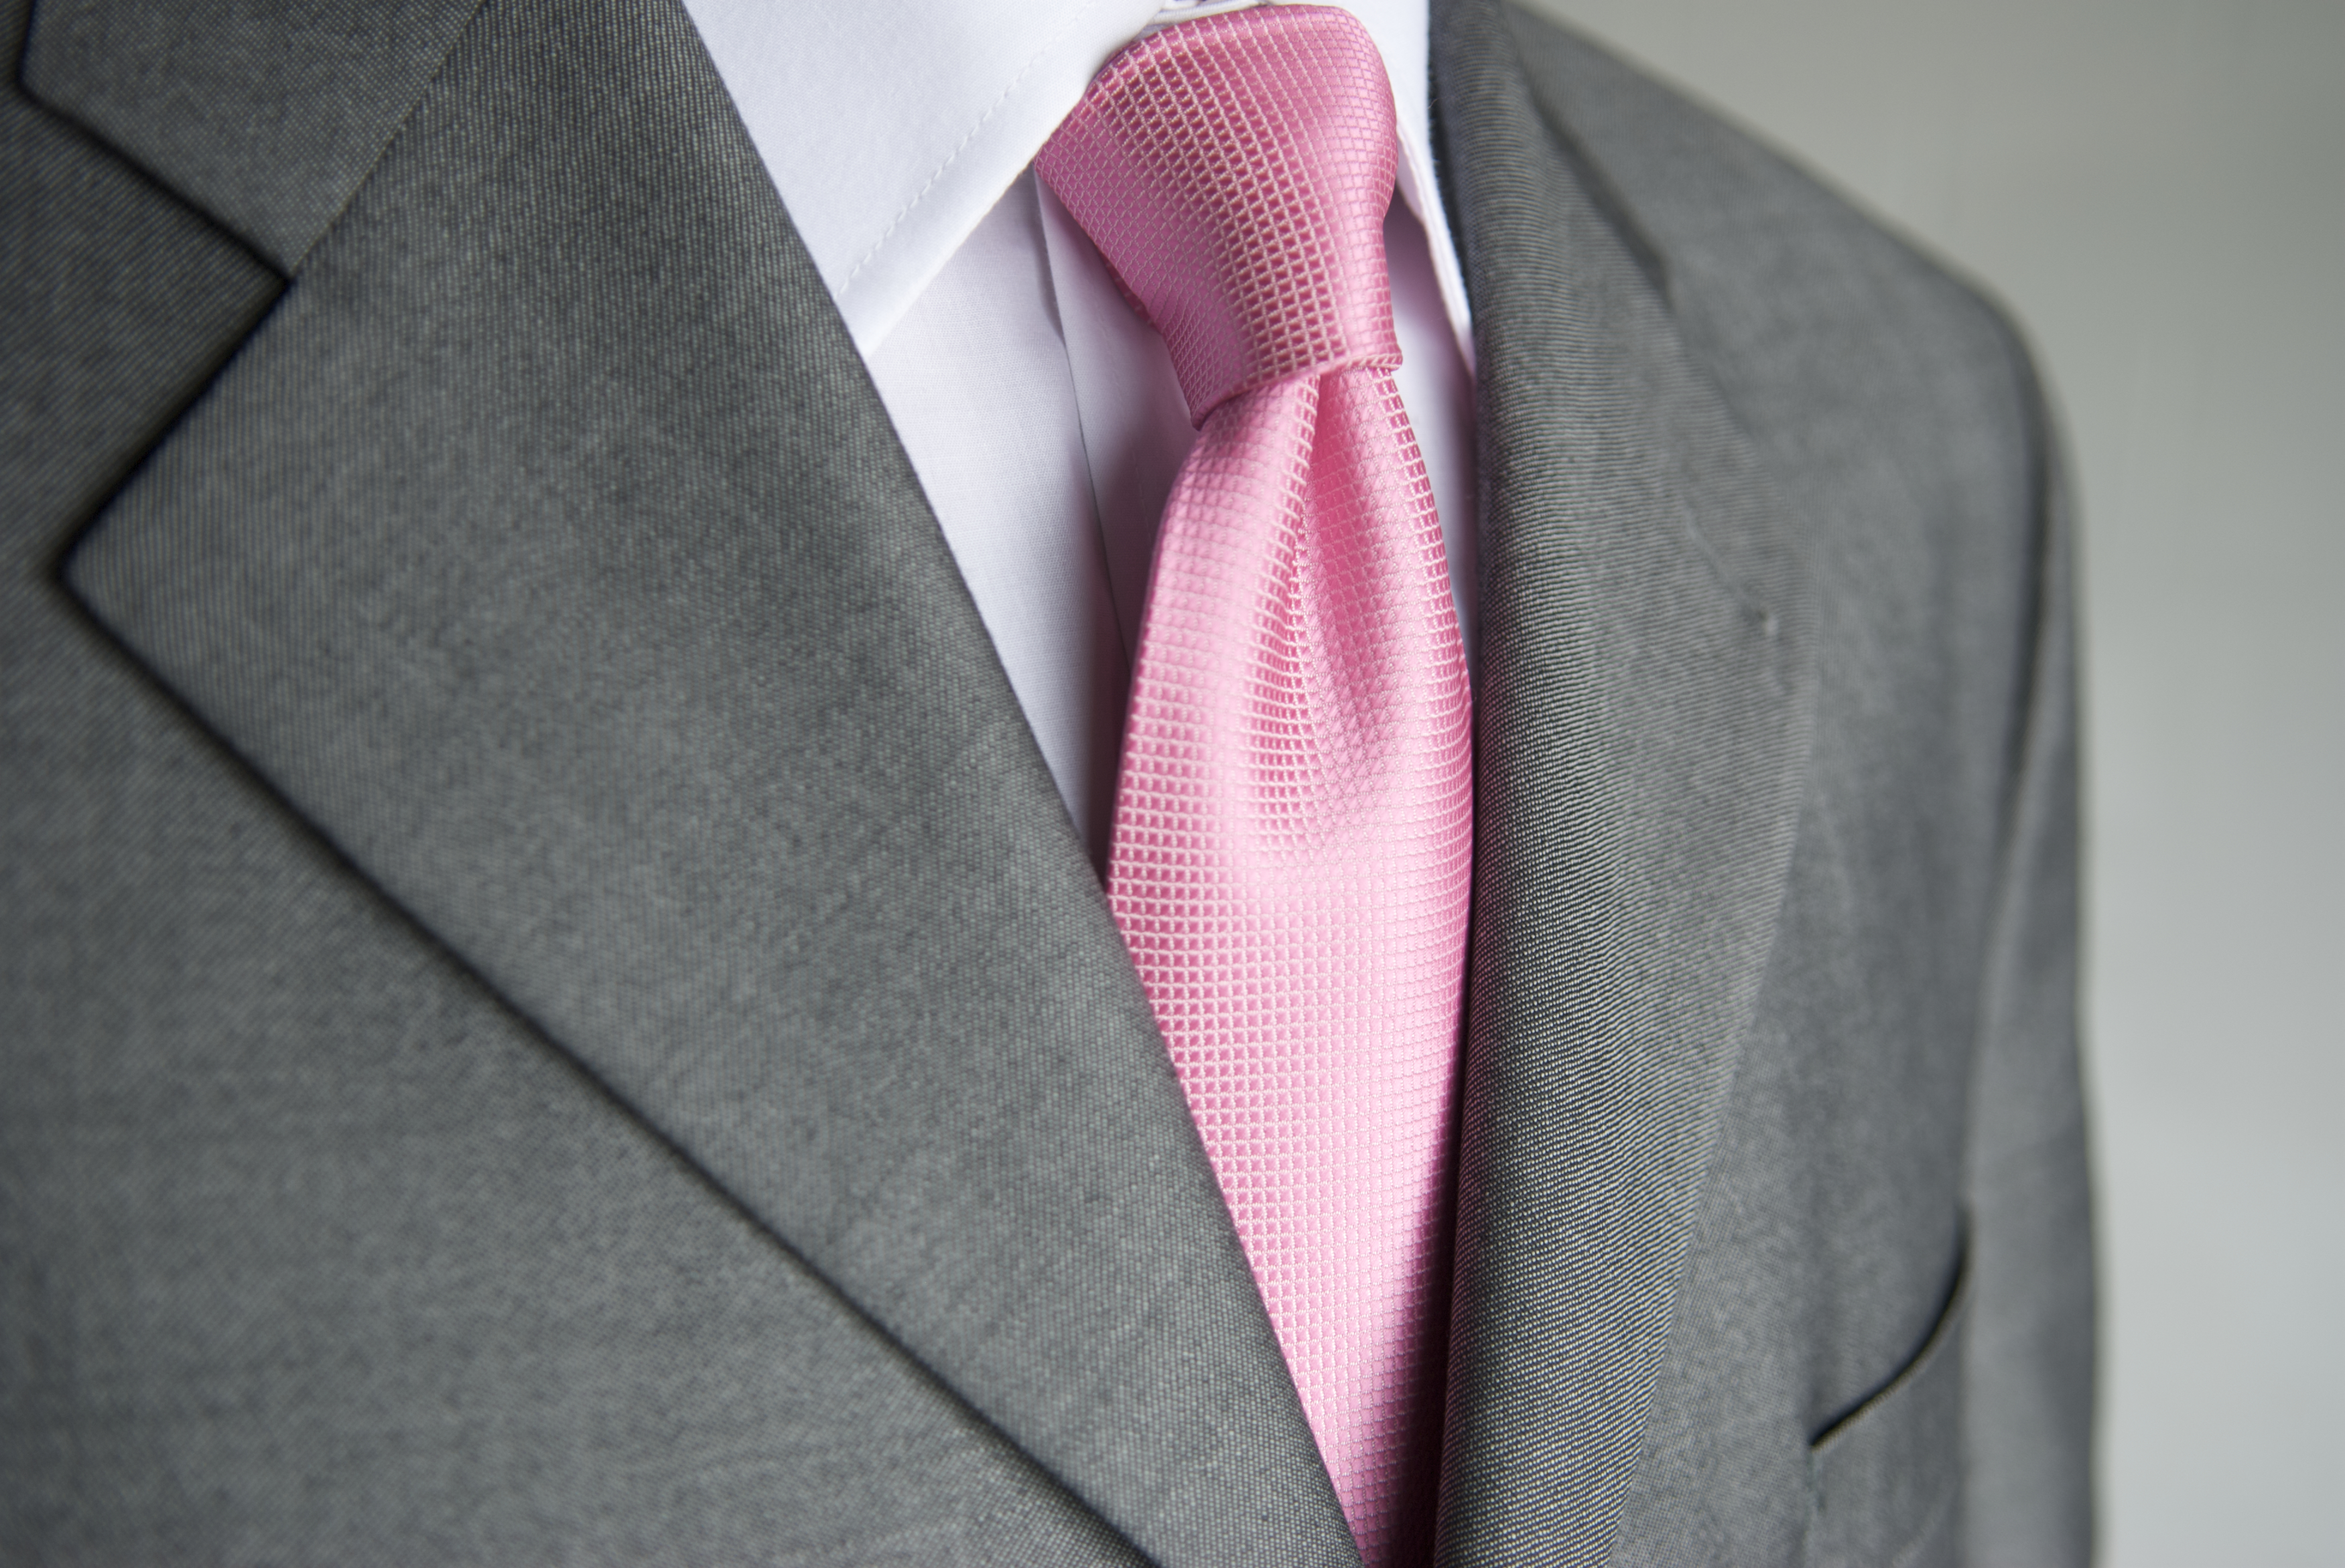 Close-up bright pink necktie makes a colorful contrast to a neutral gray suit on businessman